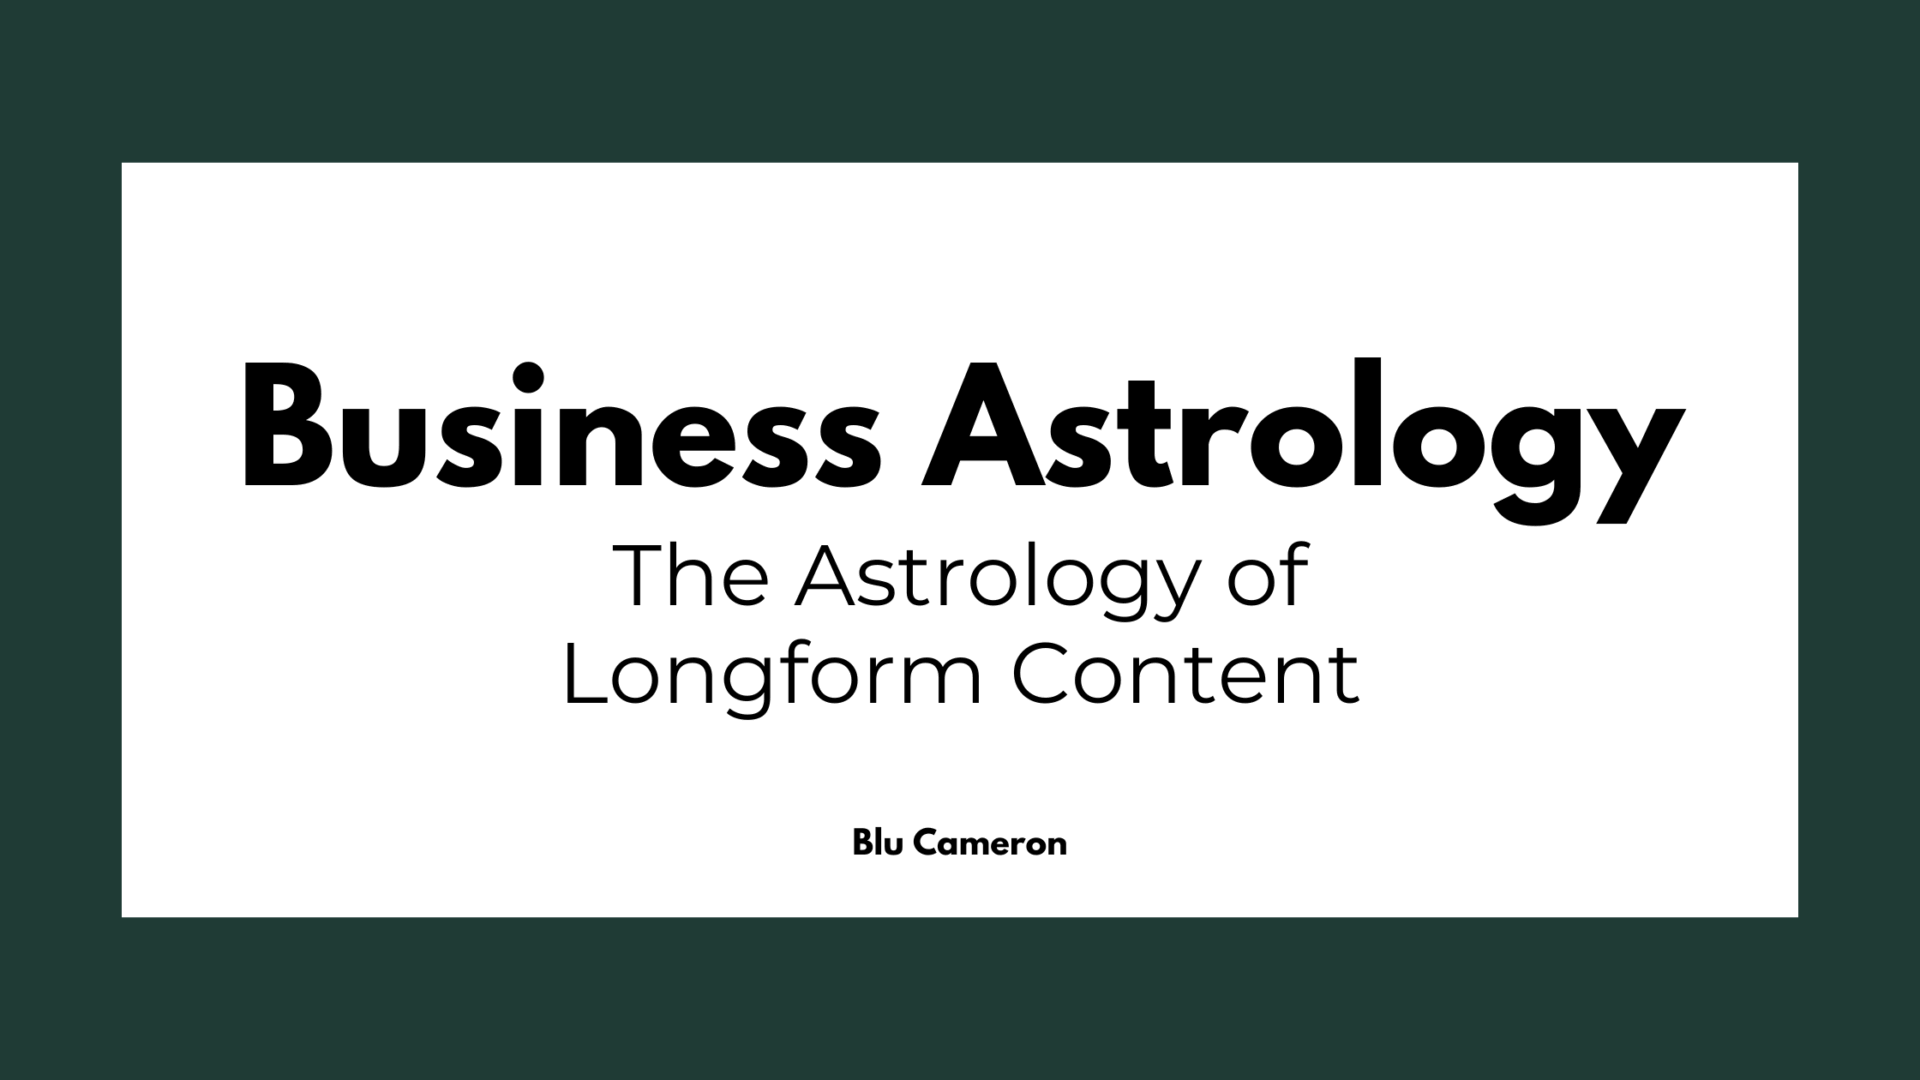 Black text against a white and green background reads: "Business Astrology, The Astrology of Longform Content, Blu Cameron"